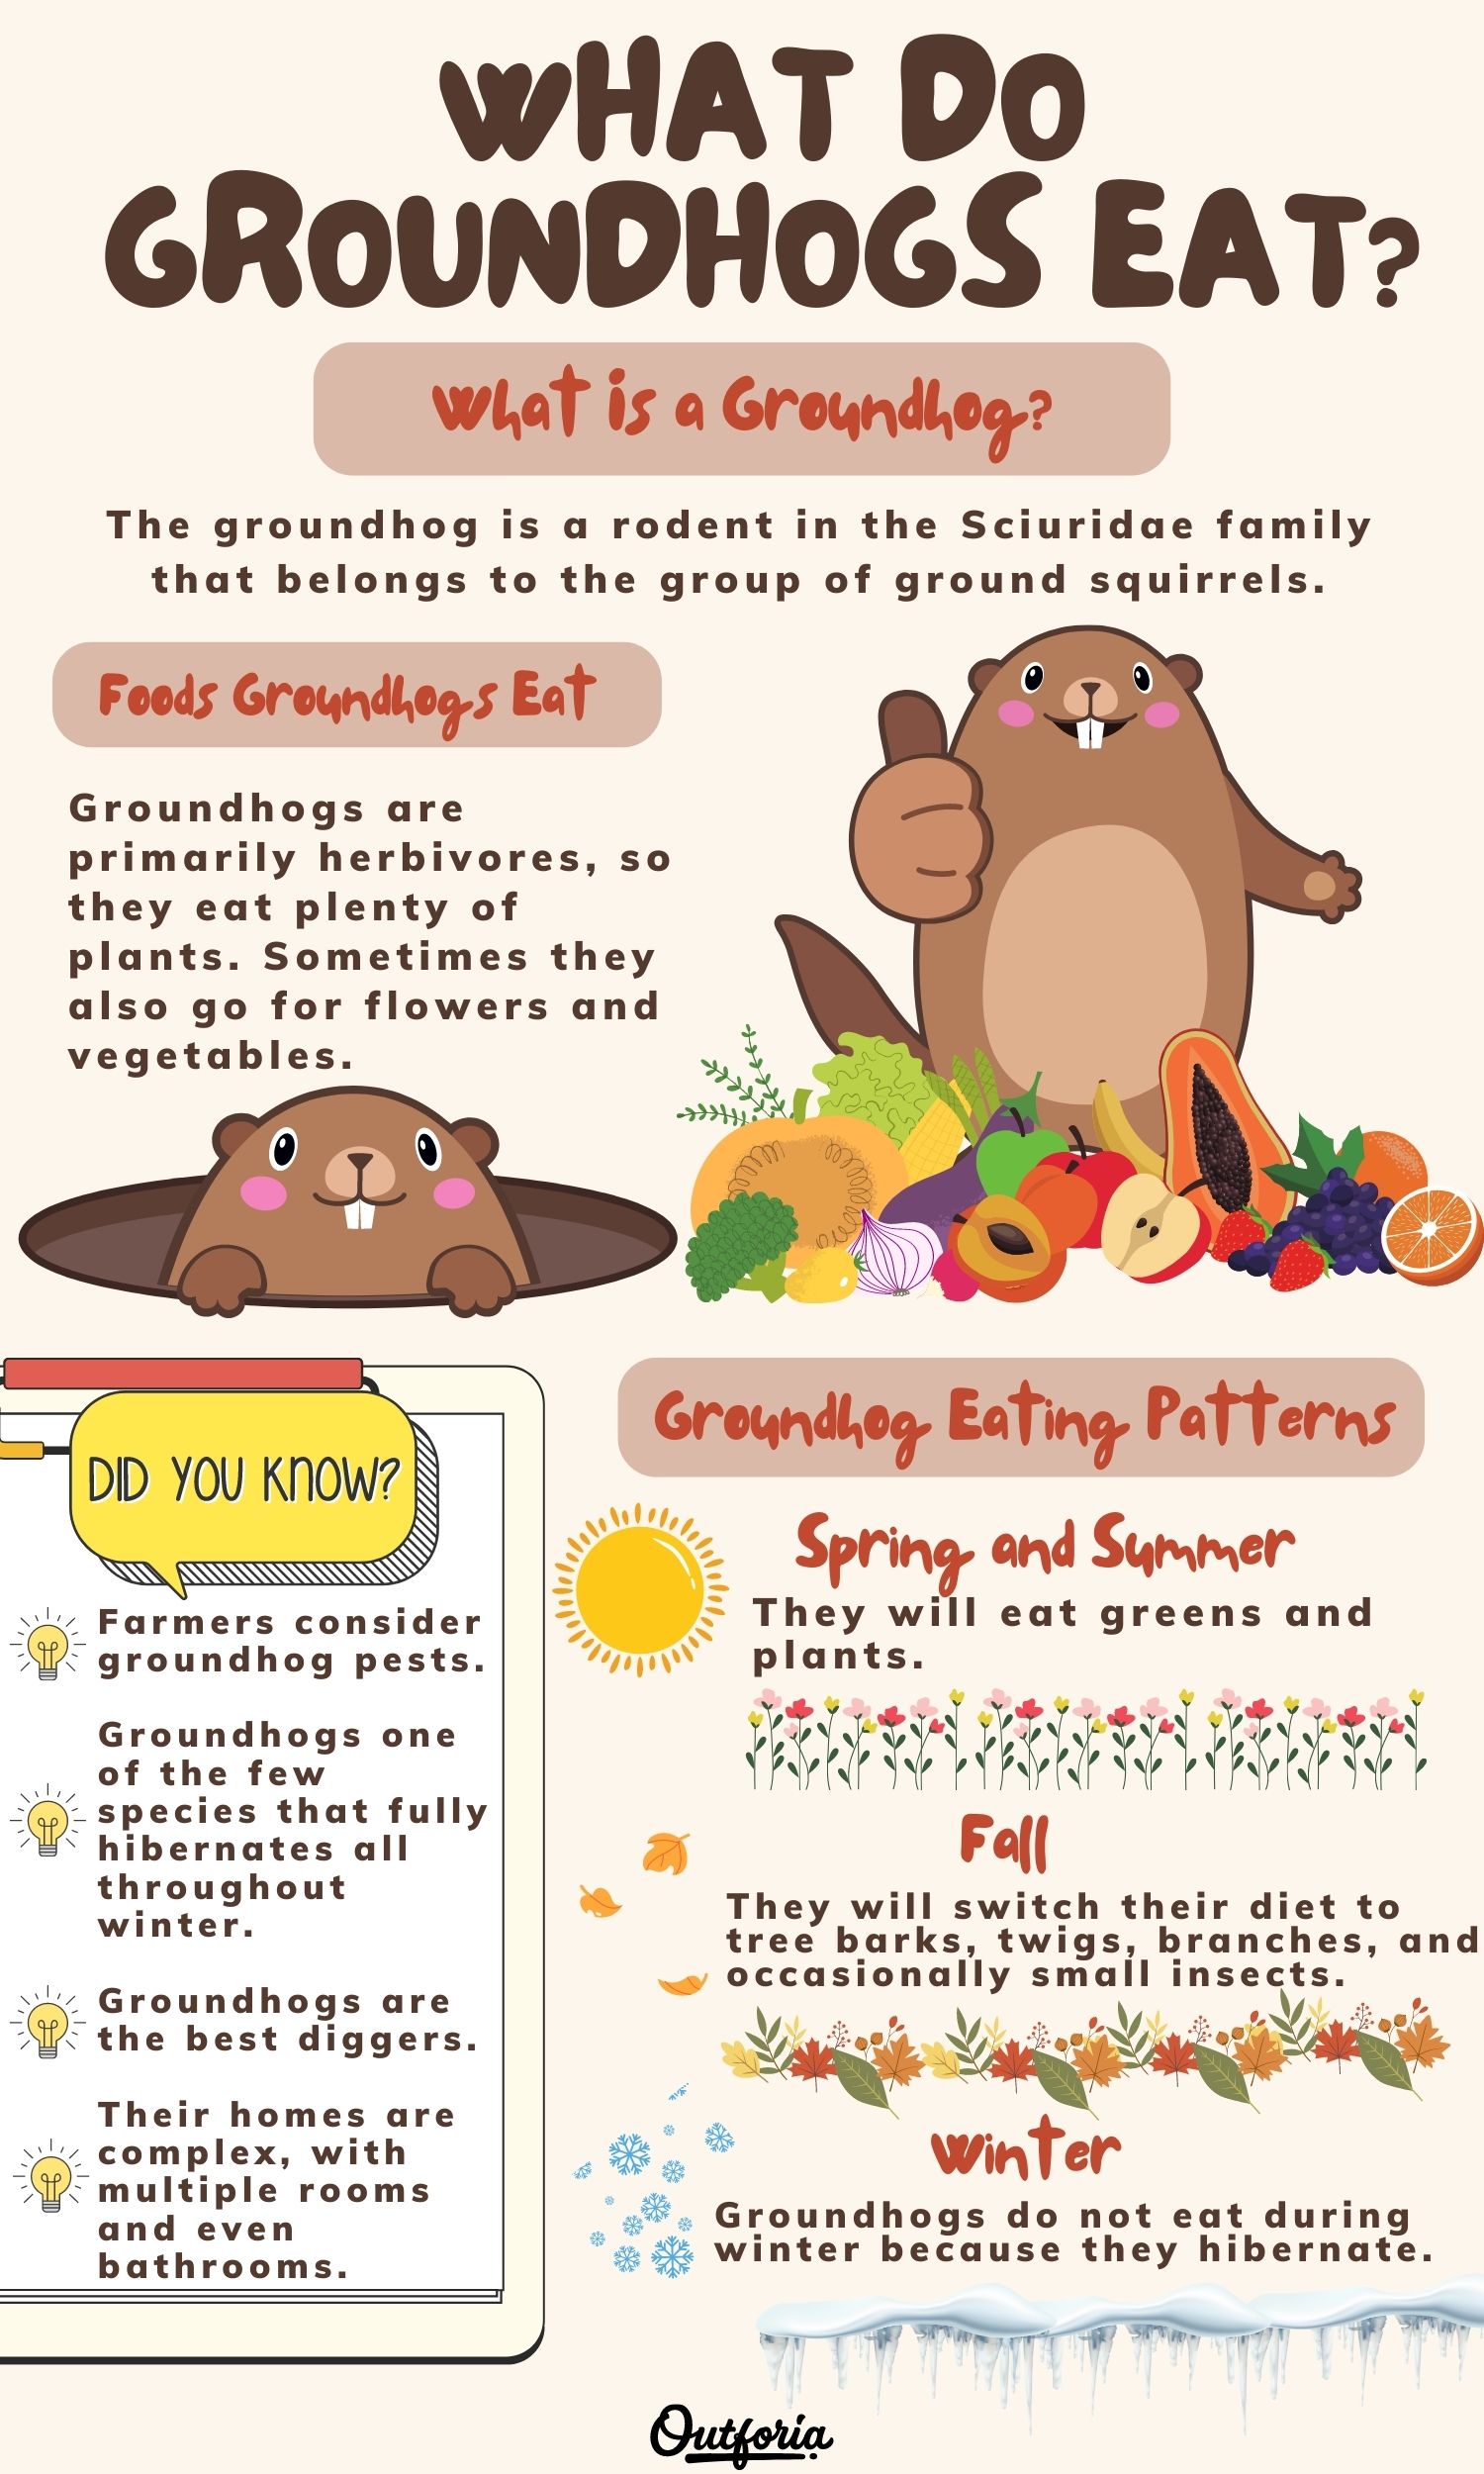 Chart illustrating the diet of groundhogs eat and what they usually eat with facts